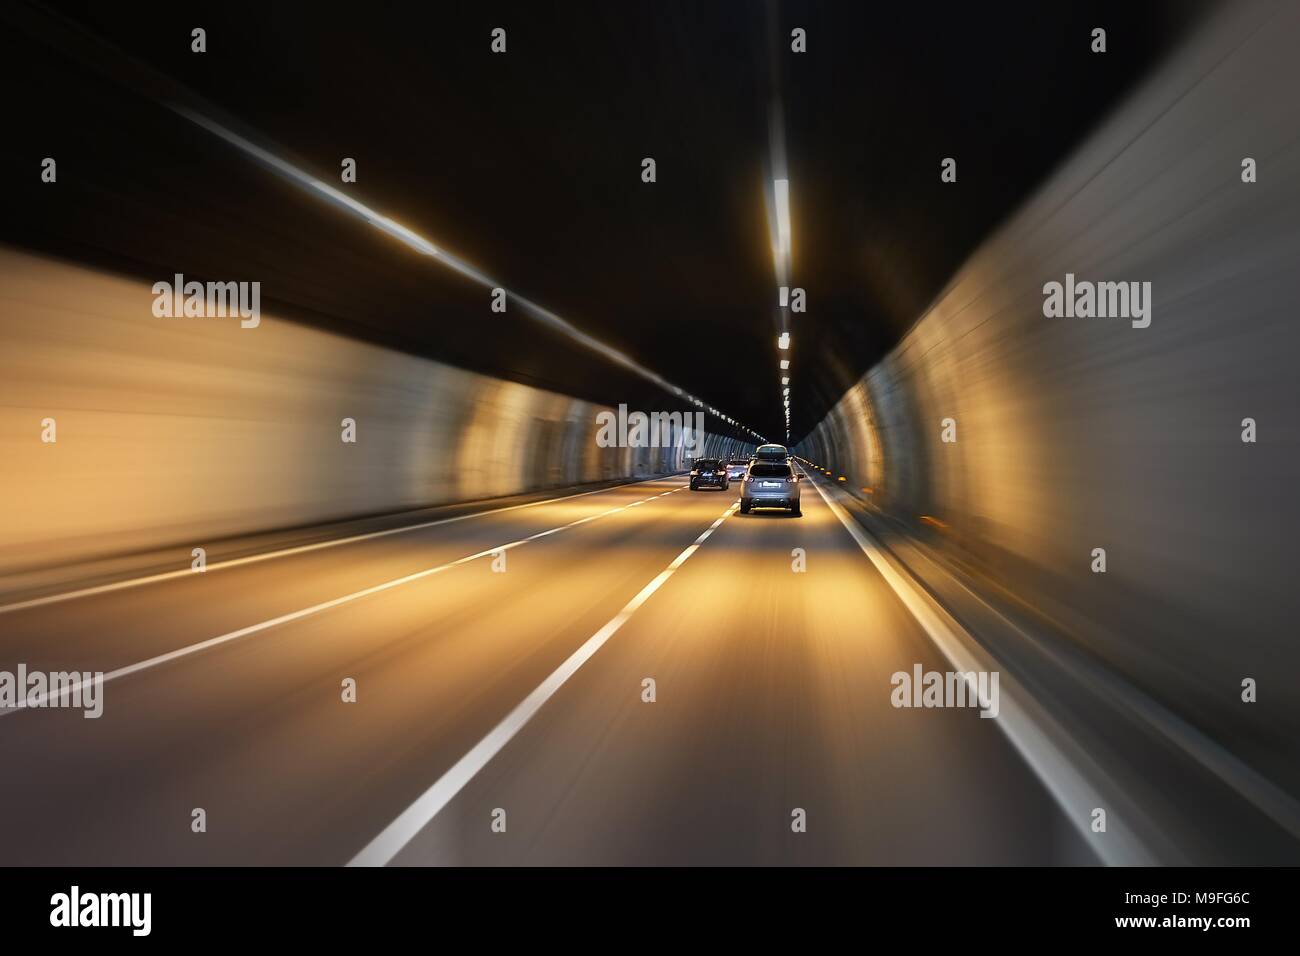 Driving in a tunnel Stock Photo